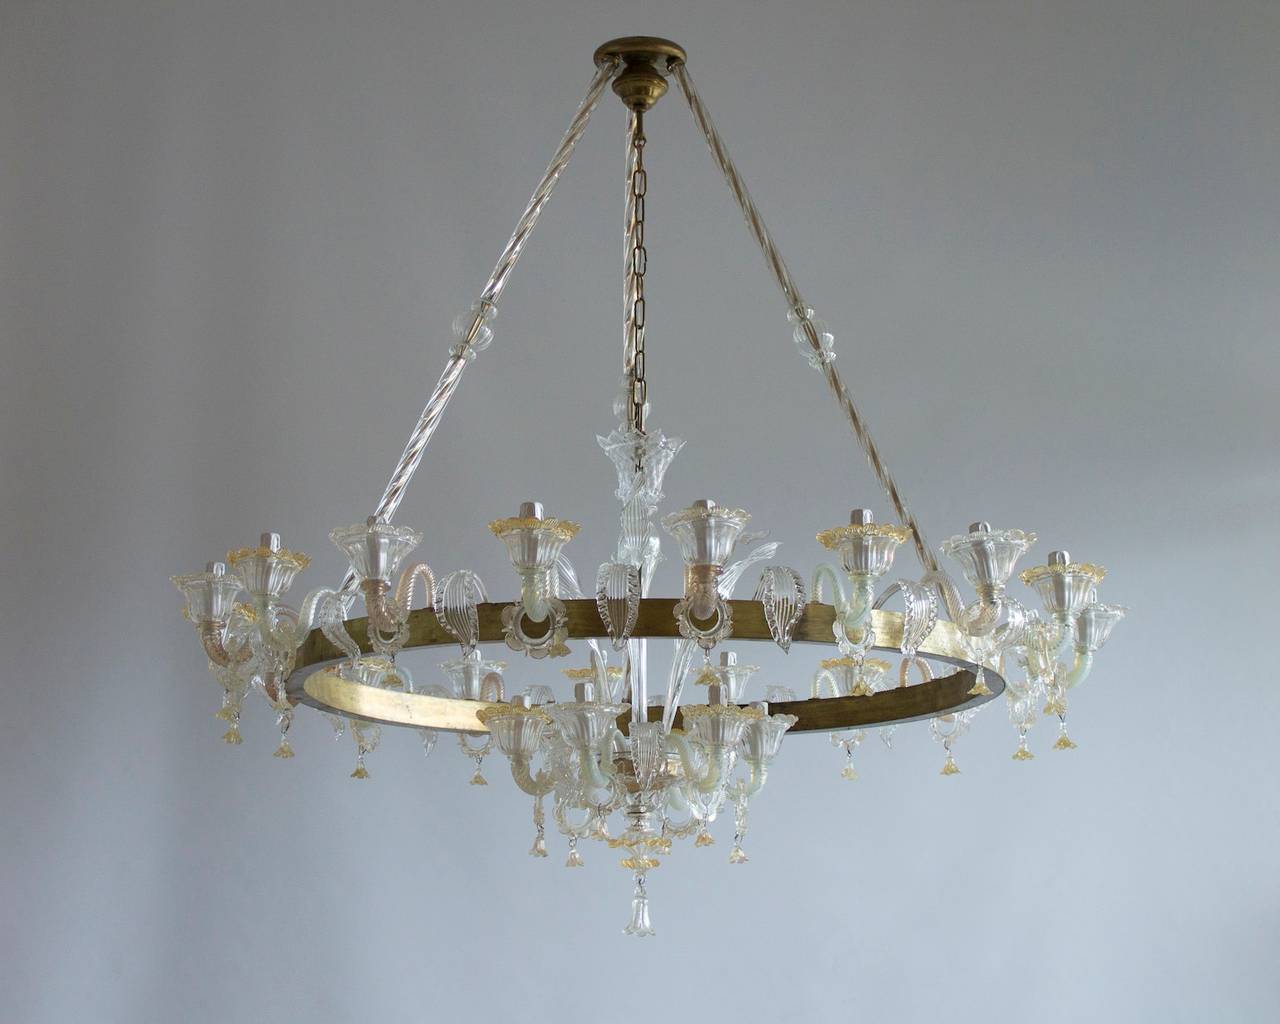 Amazing and rare chandelier, Italian Venetian, chandelier, blown Murano glass, antique gold and brass, in transparent and gold, white, opaline, composed by a circular brass frame with leafs and arms, with three long stems joining in a brass cup in